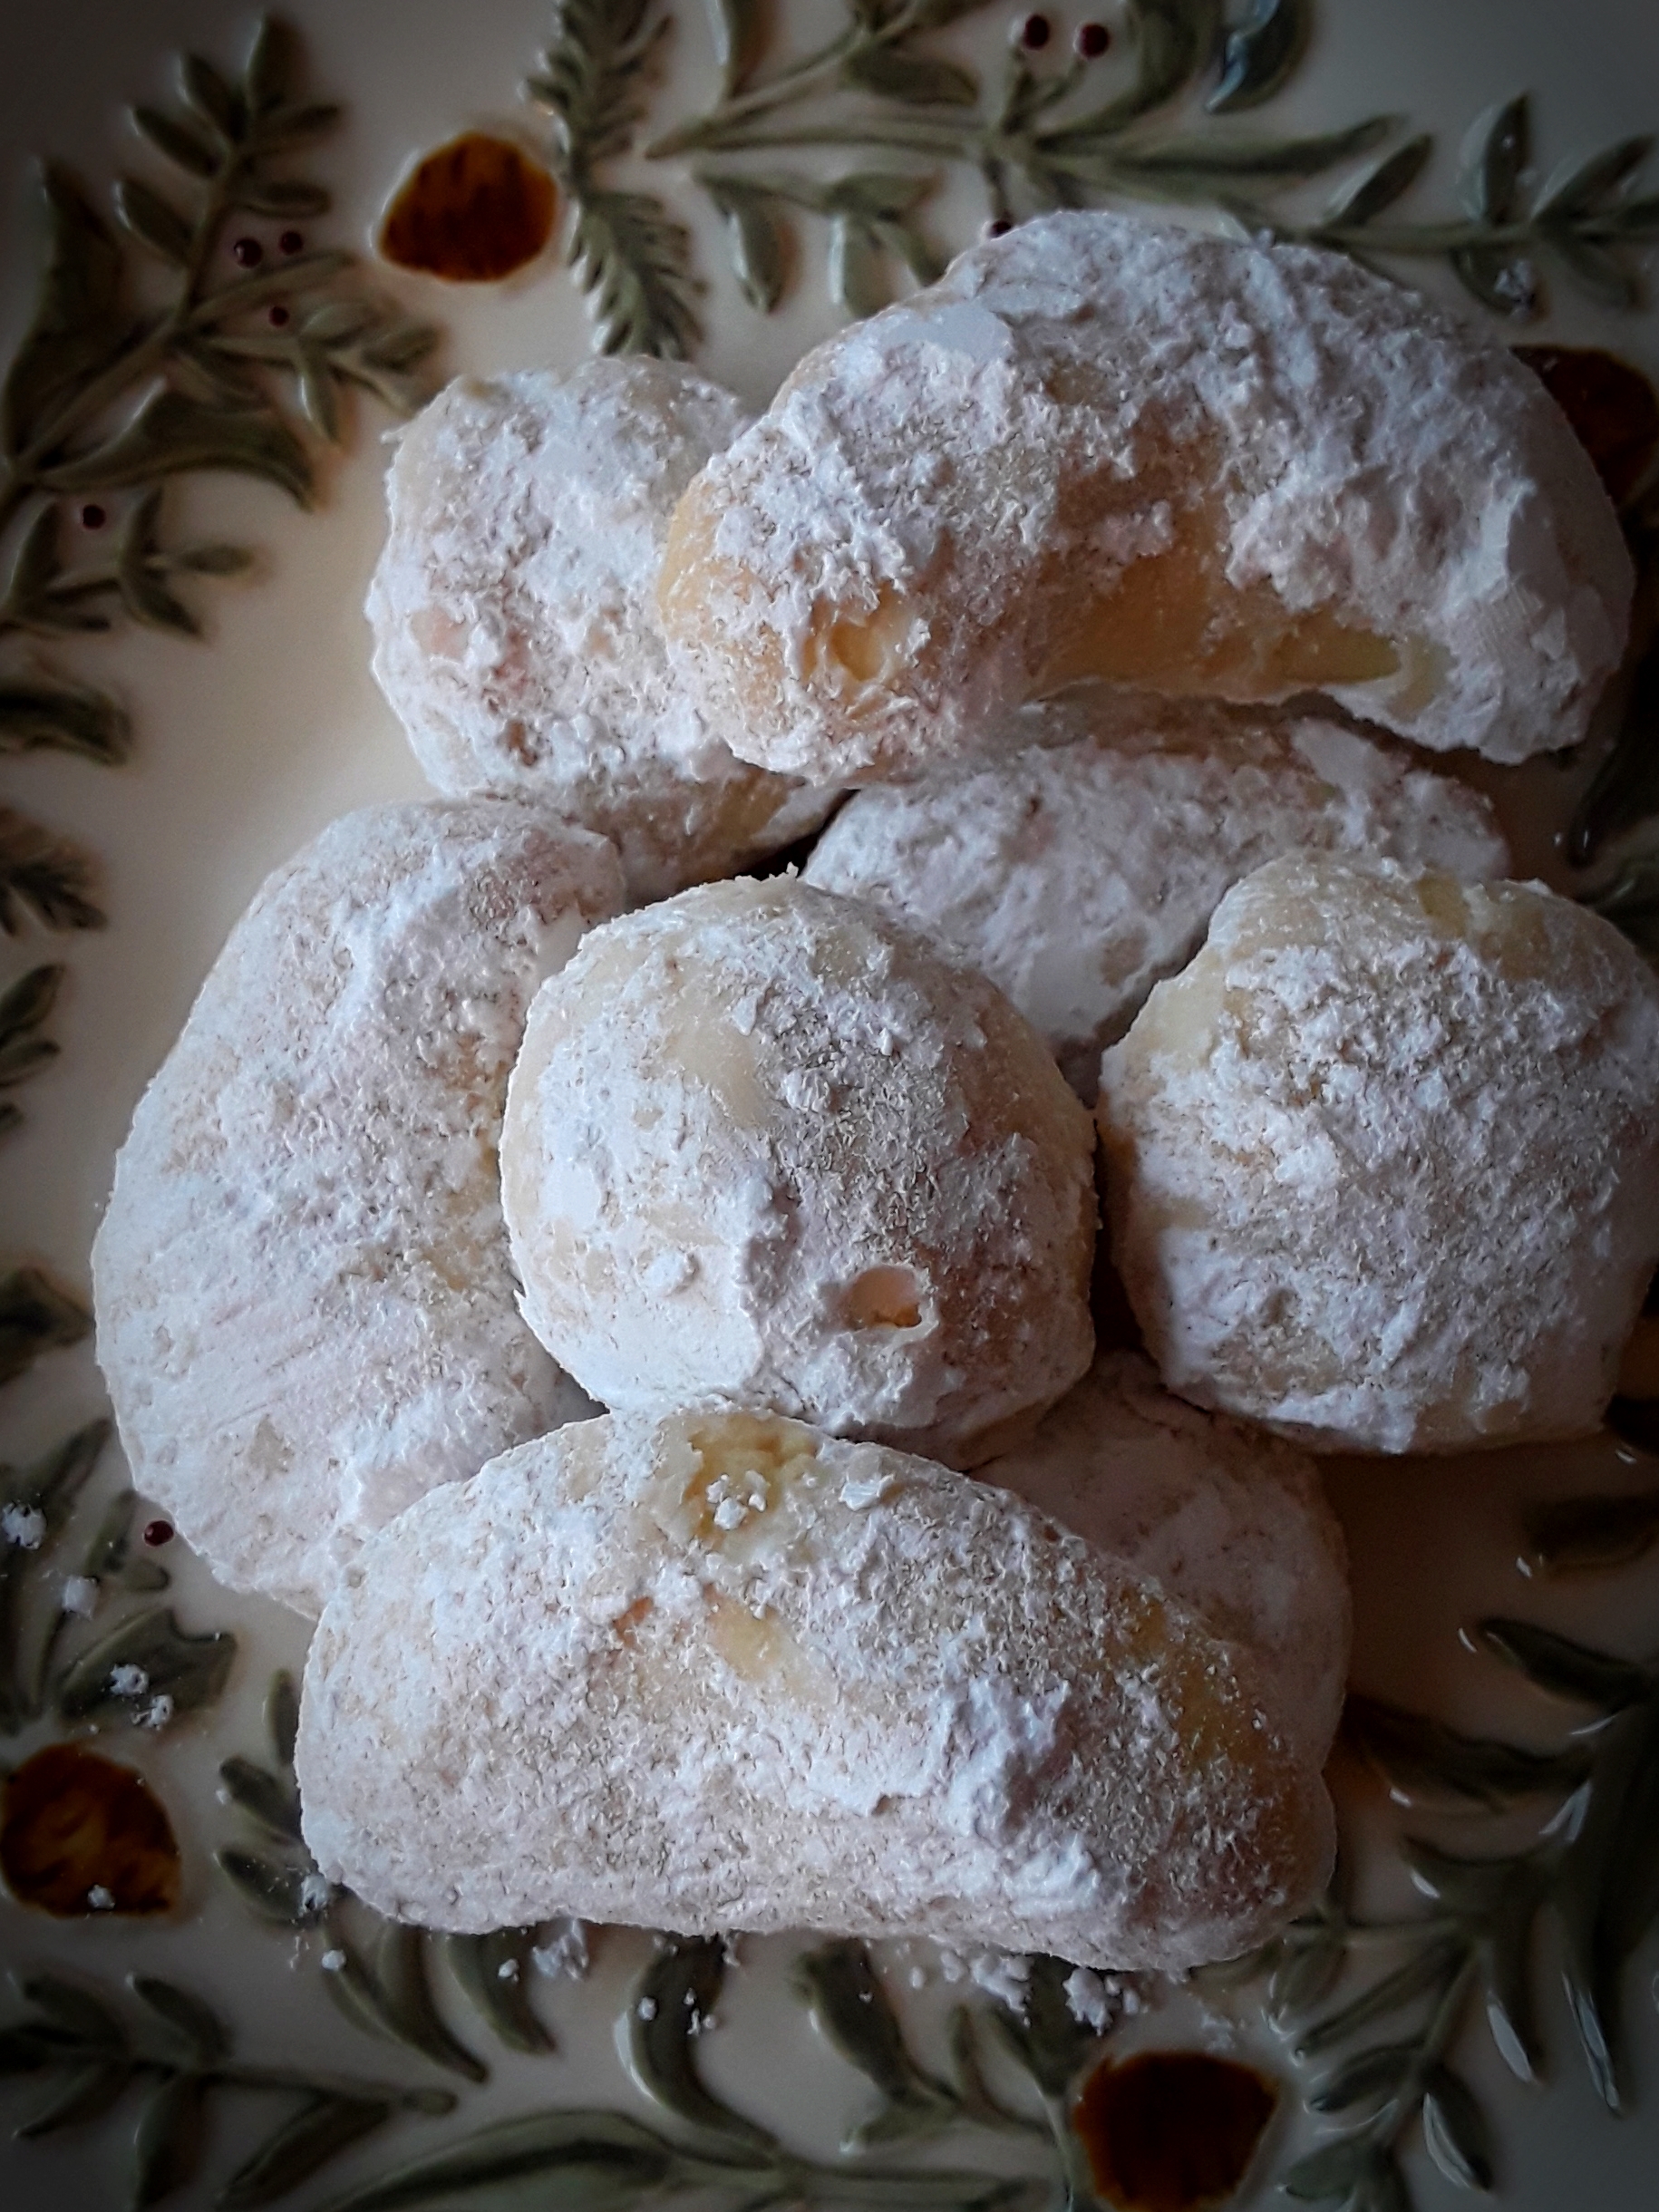 Kourambiethes - snowball cookies - rolled in powdered sugar